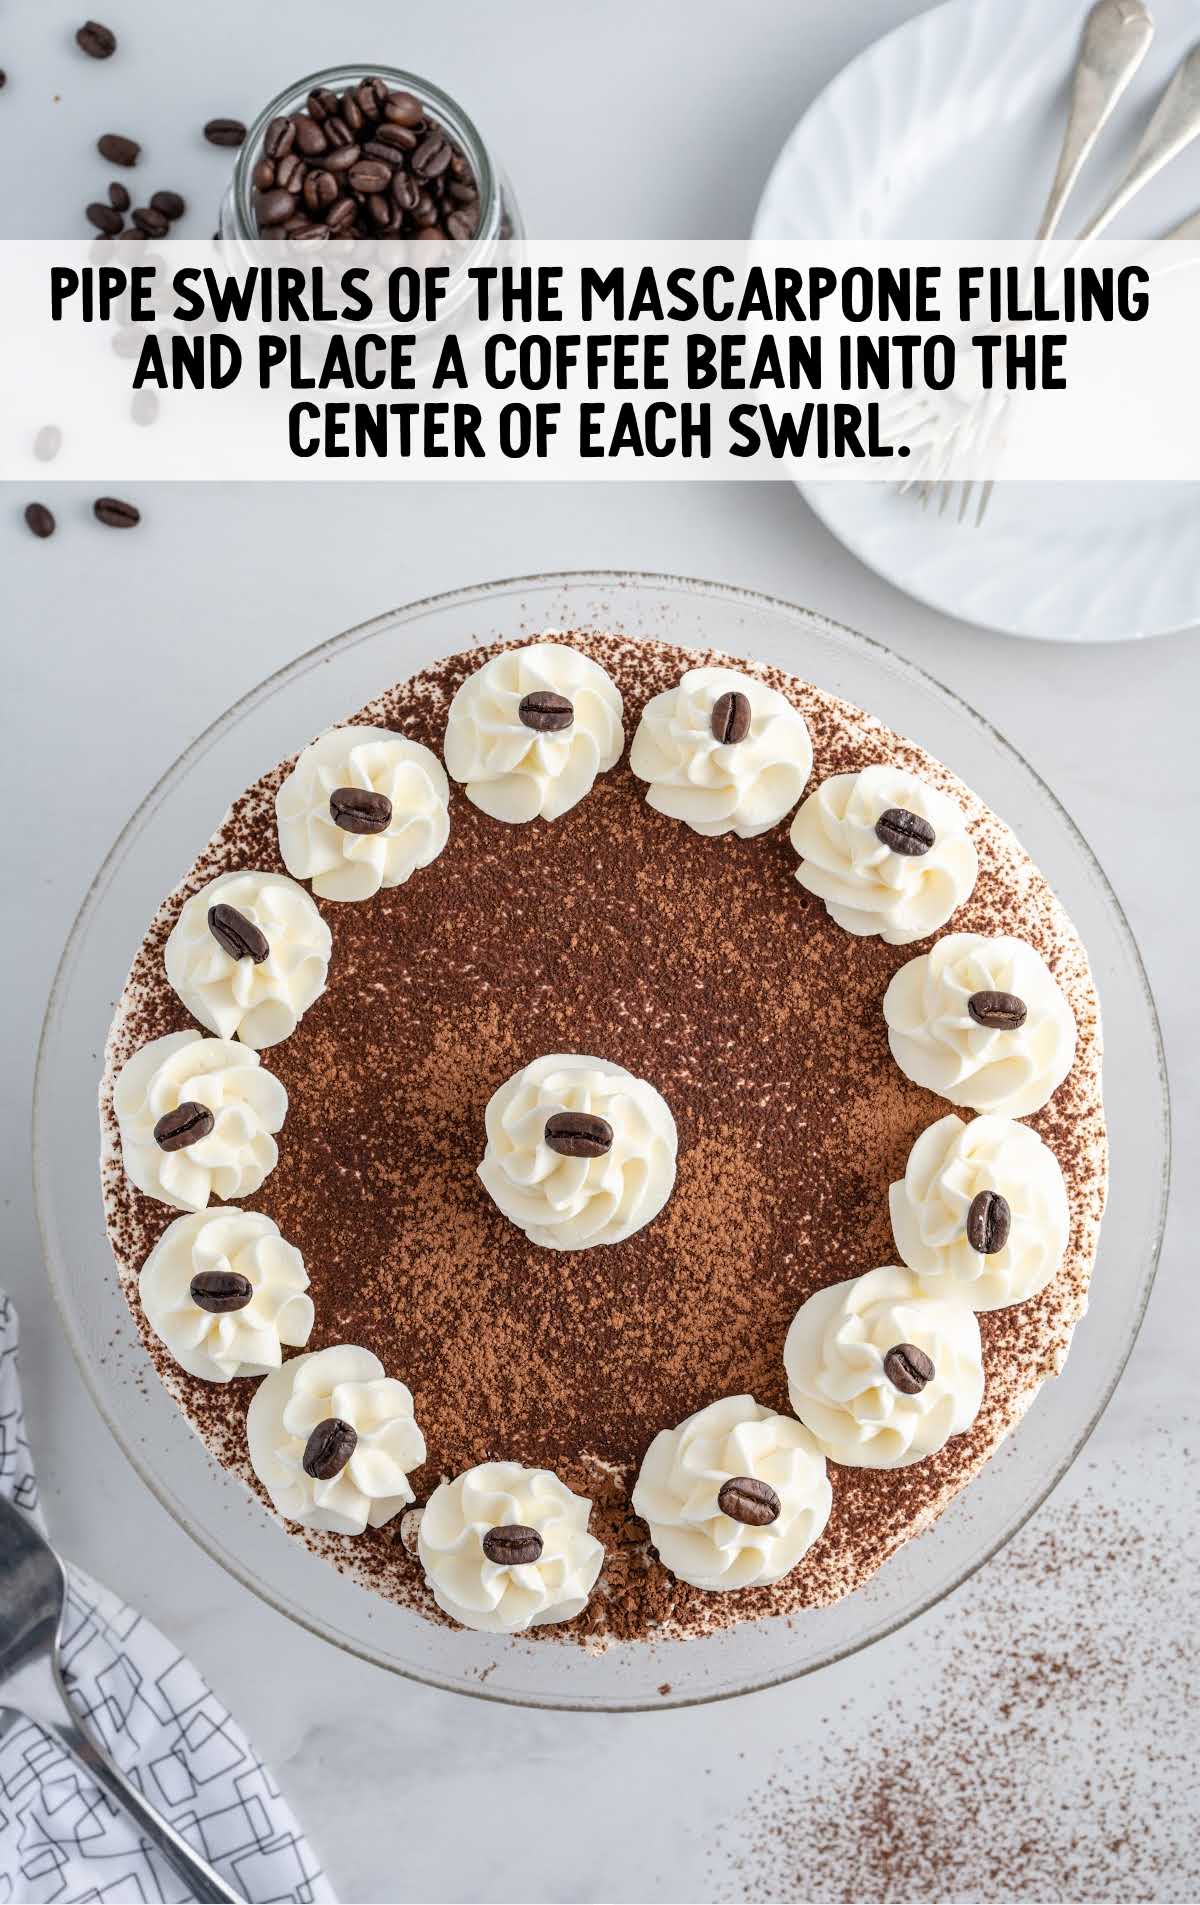 swirls of mascarpone filling piped and coffee bean placed into the center of each swirl